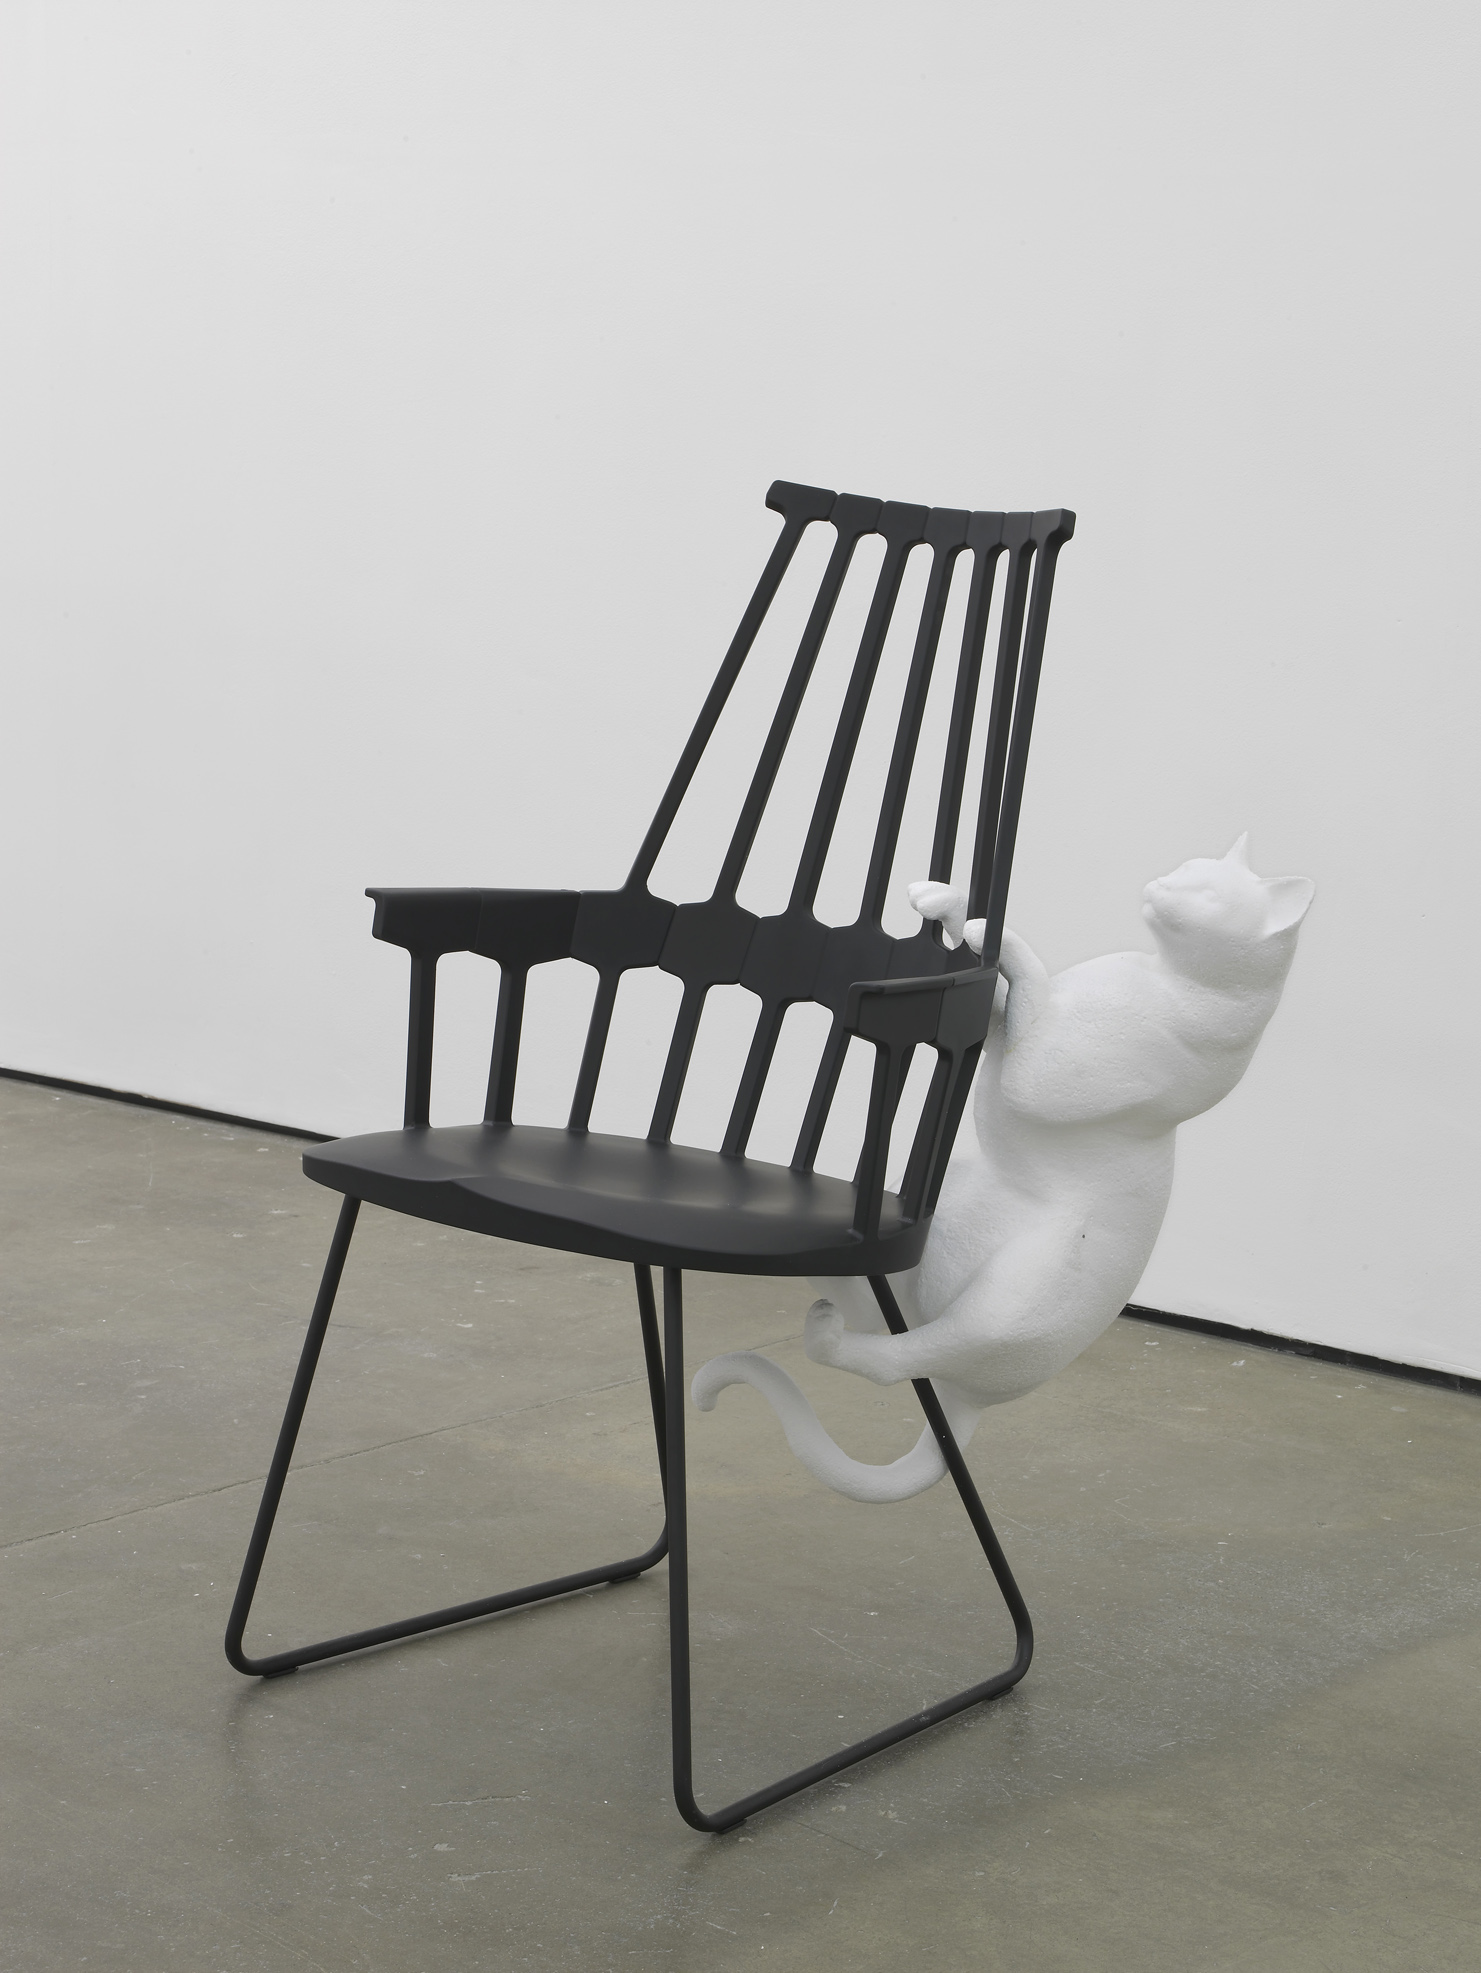     Leaping Cat  2014  Polystyrene and 21st century Windsor chair  98 x 72 x 60 m / 38.5 x 28.3 x 23.6 in 